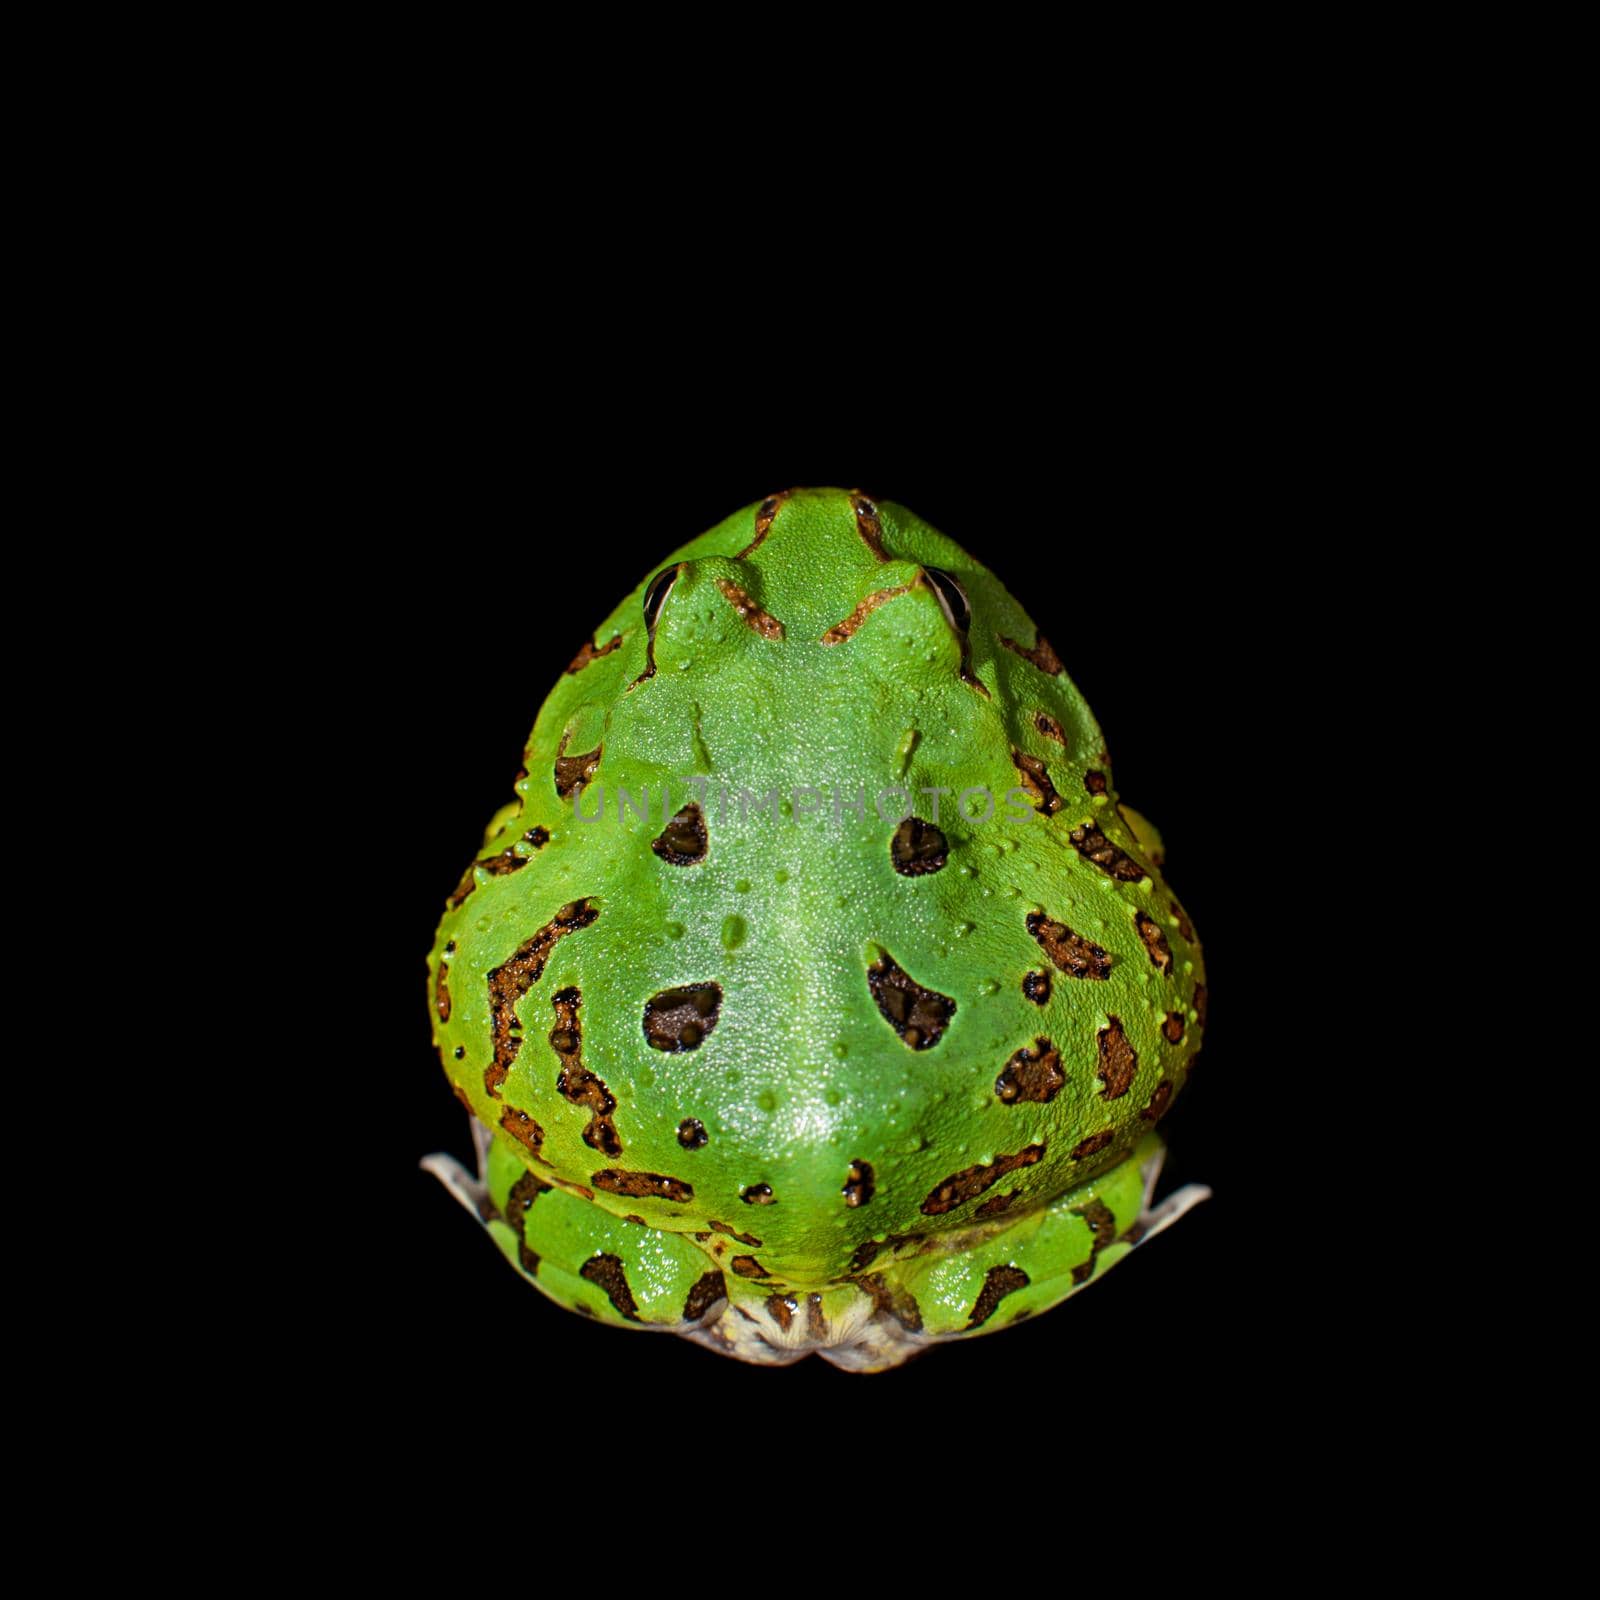 The Brazilian horned frog isolated on black by RosaJay